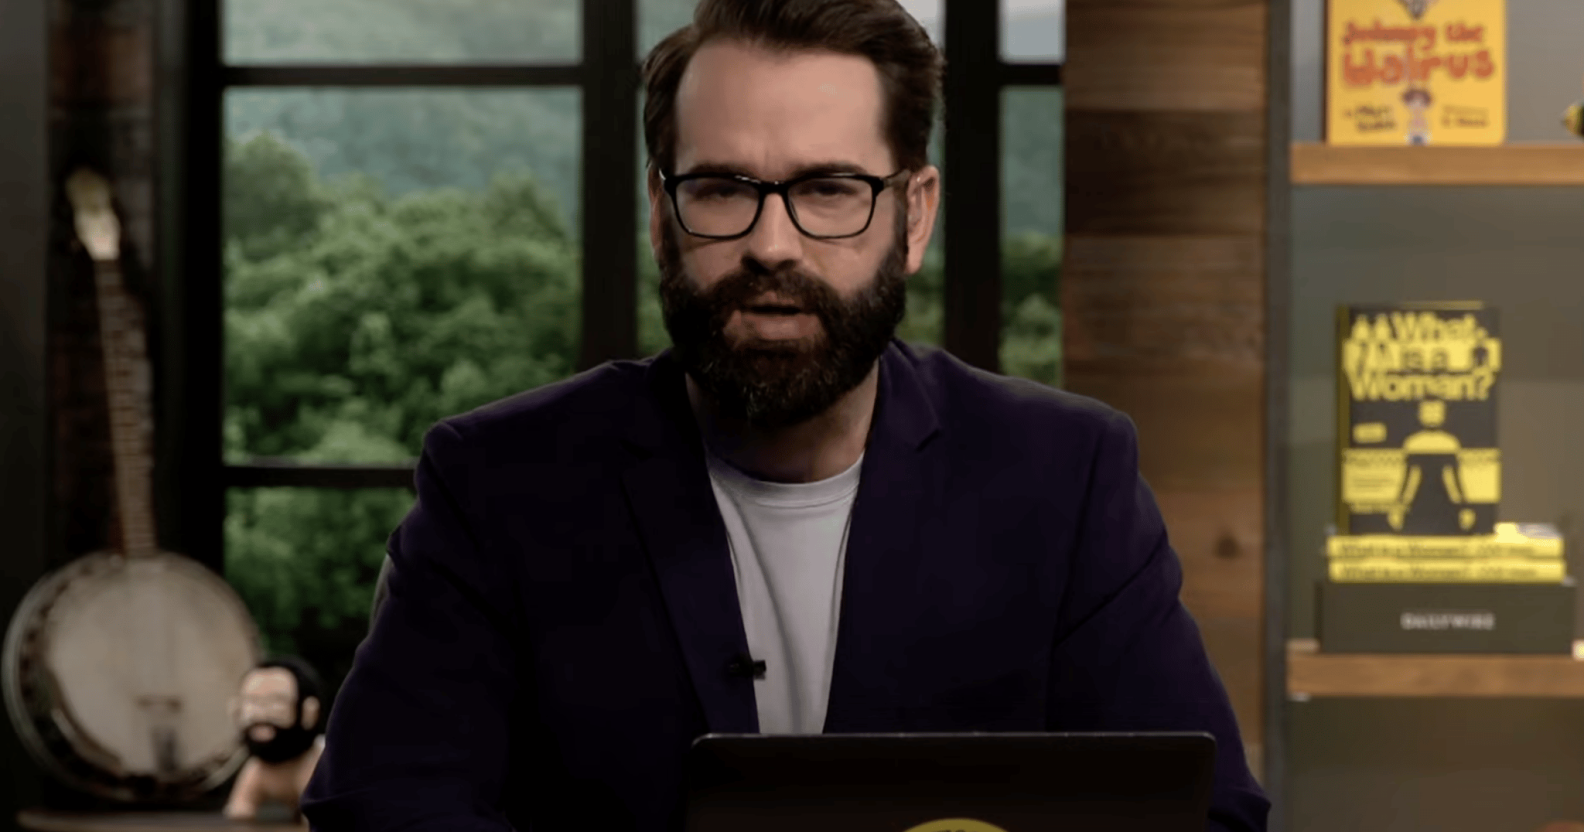 A screenshot of right-wing columnist and blogger Matt Walsh wearing glasses, black suit jacket over a white T-shirt talking on his YouTube show